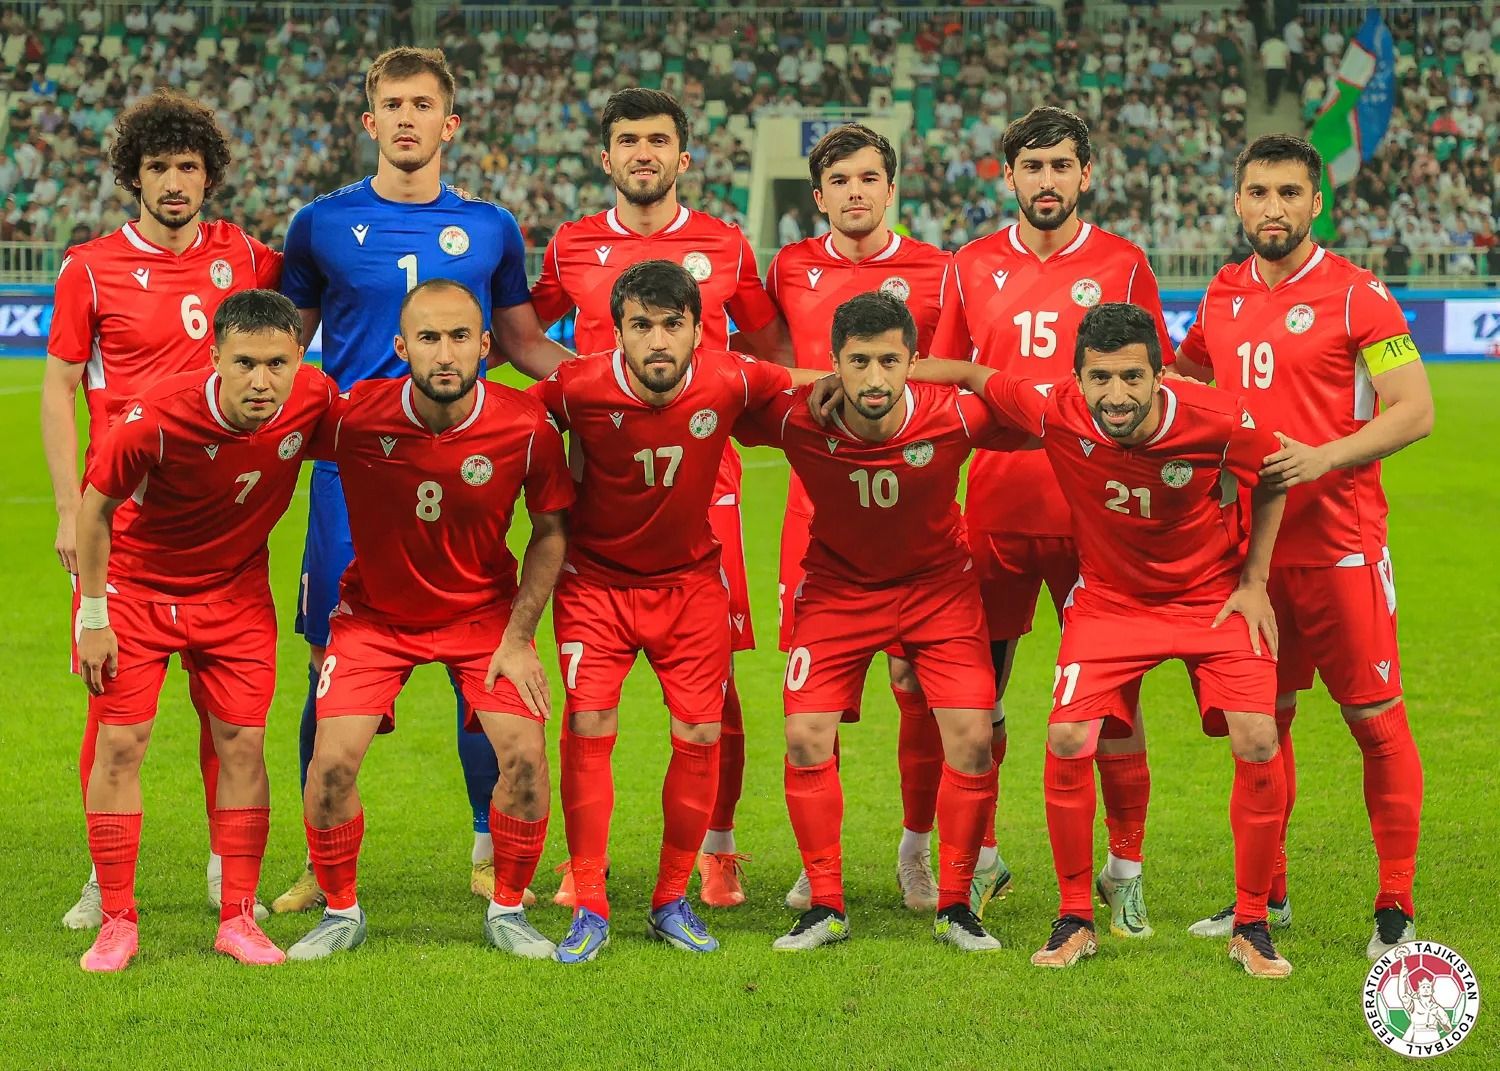 MMA Fighter Gaforov: If Goalkeeper Saves The Day, Tajikistan National Football Team Will Reach Asian Cup Semifinals